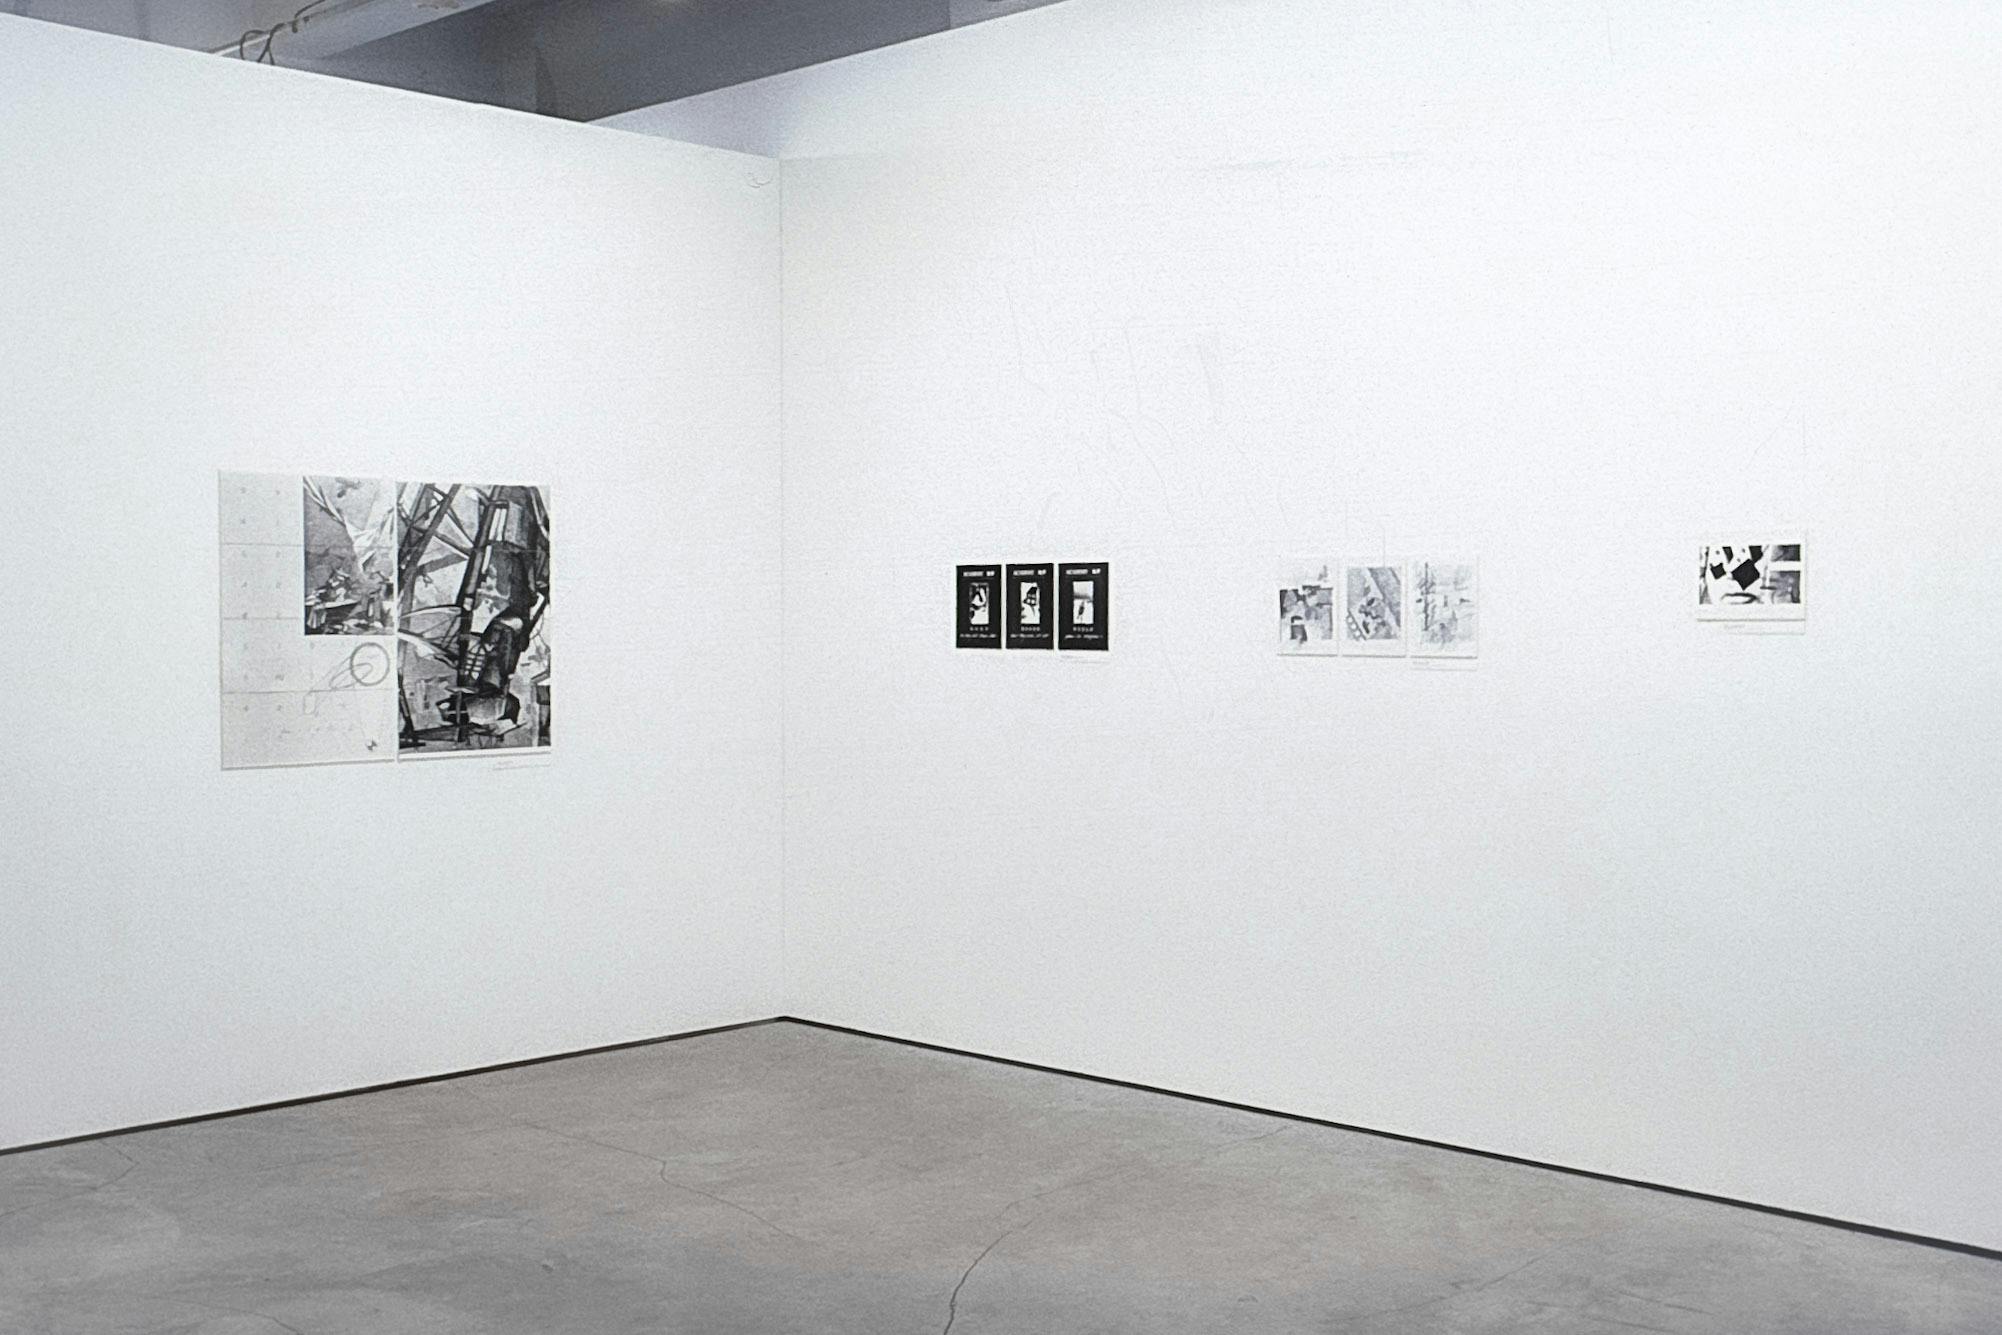 4 different artworks are on the walls of a gallery. One is made of a large black and white photo of metal architecture and text. The others are smaller and include different black and white photos.